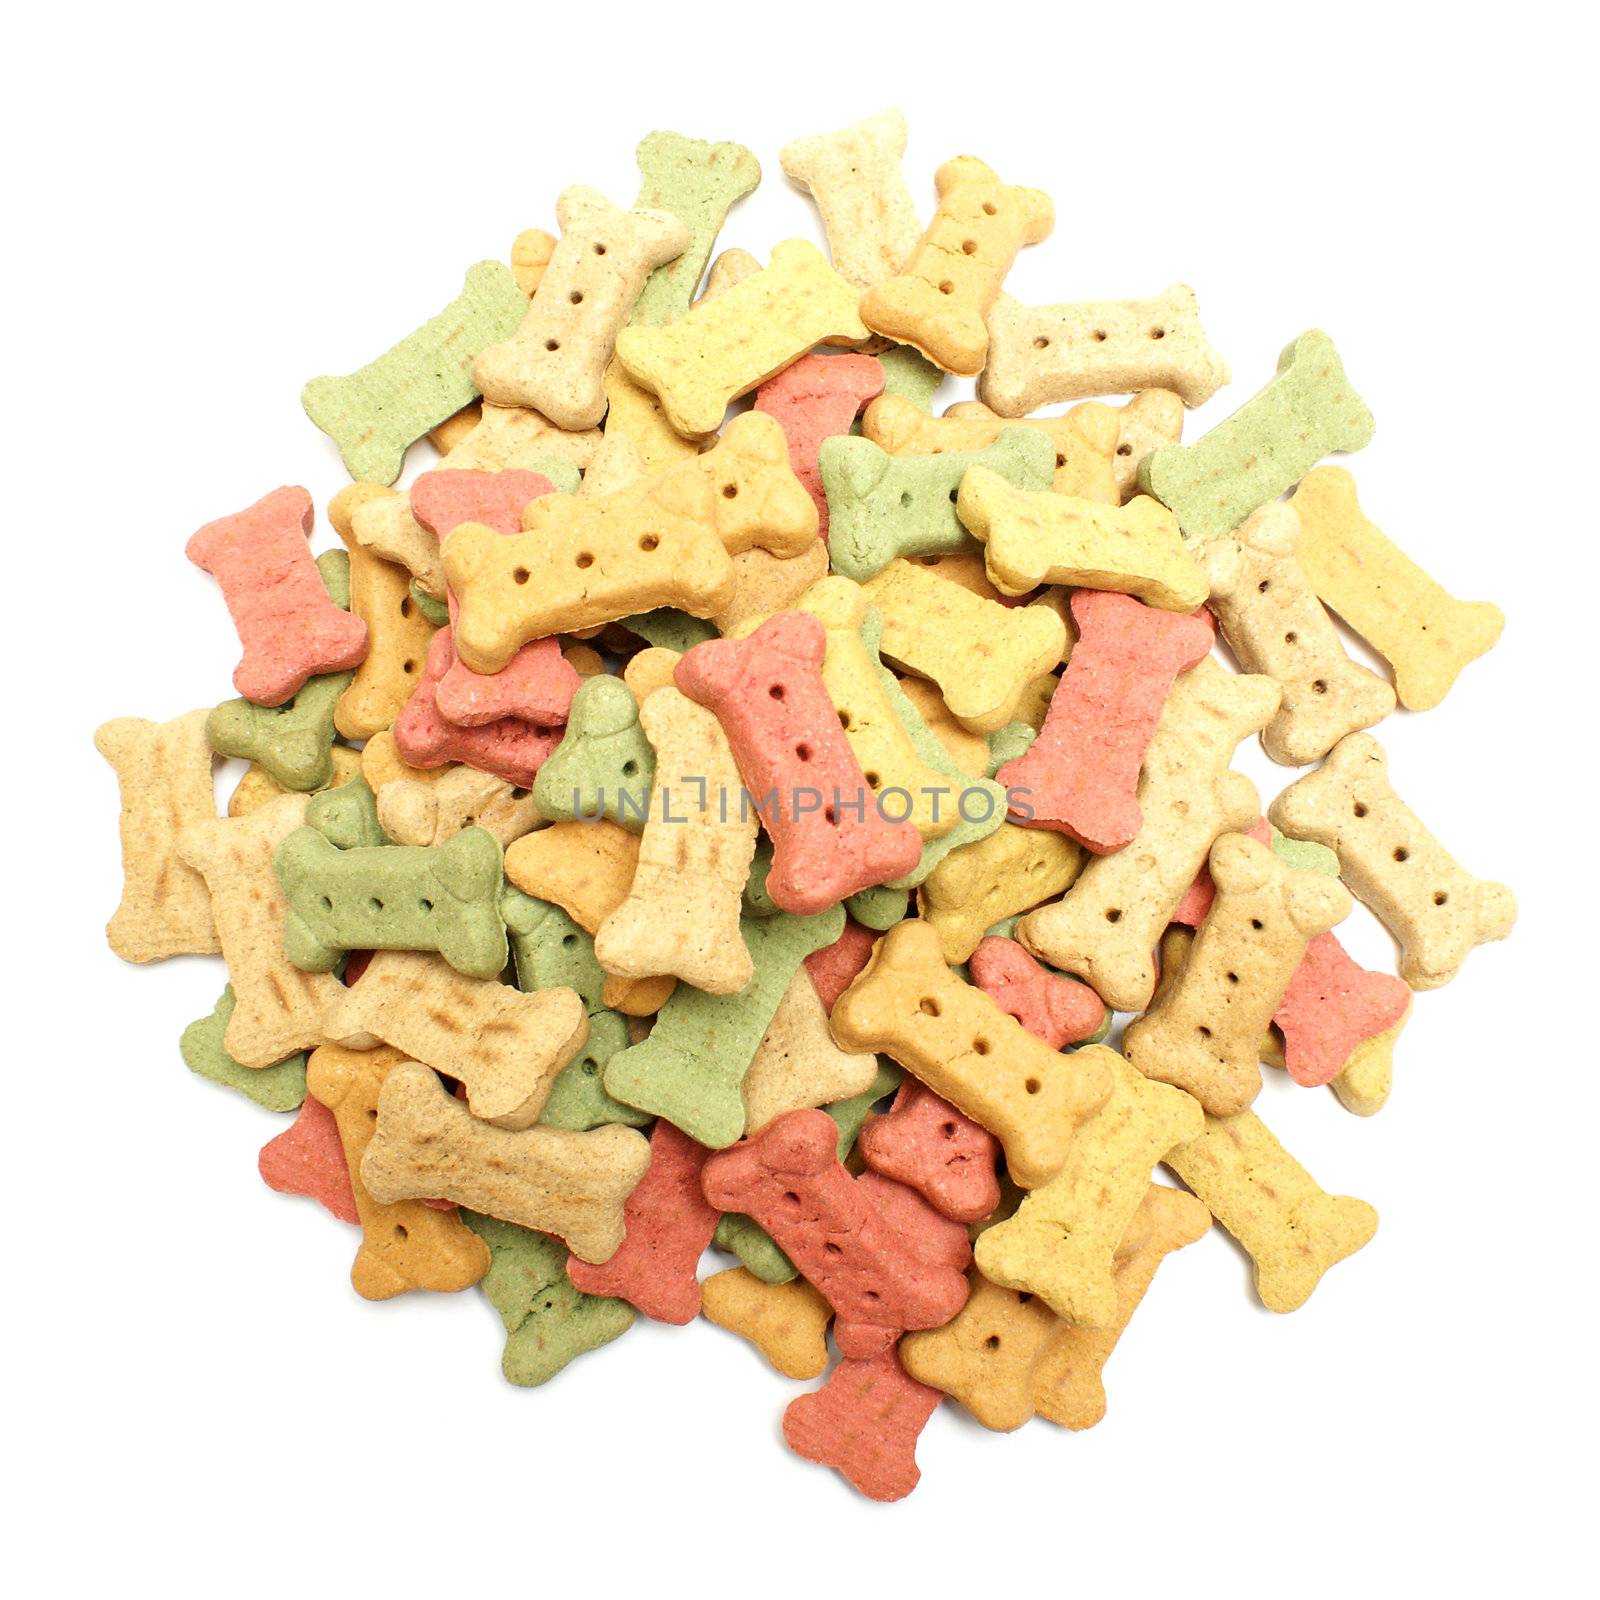 An overhead shot of a pile of bone shaped dog treats isolated on white.